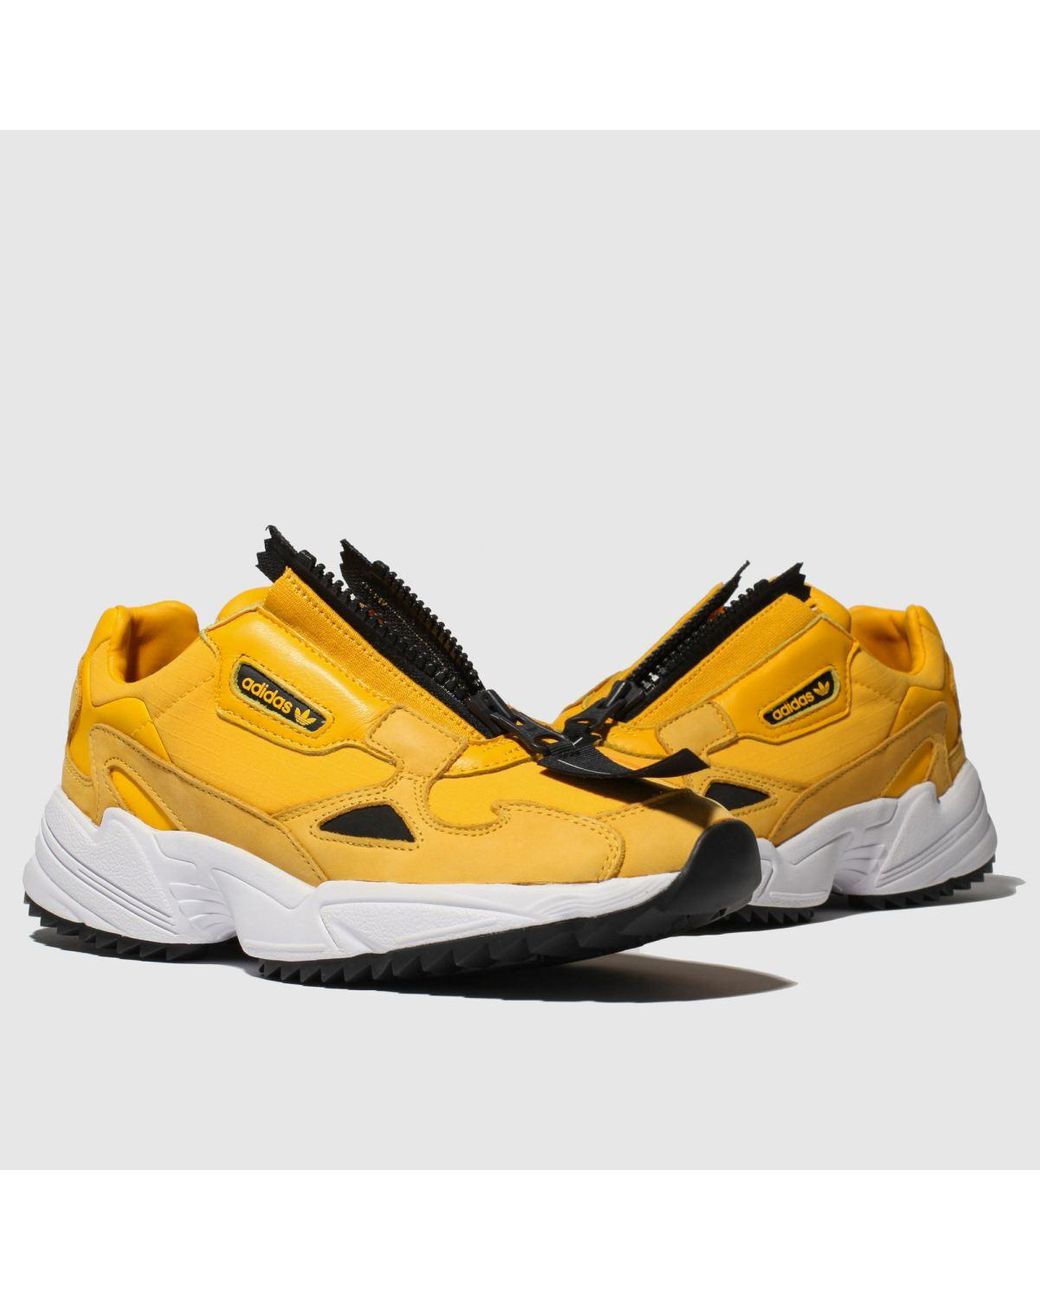 adidas Falcon Zip Trainers in Yellow | Lyst UK